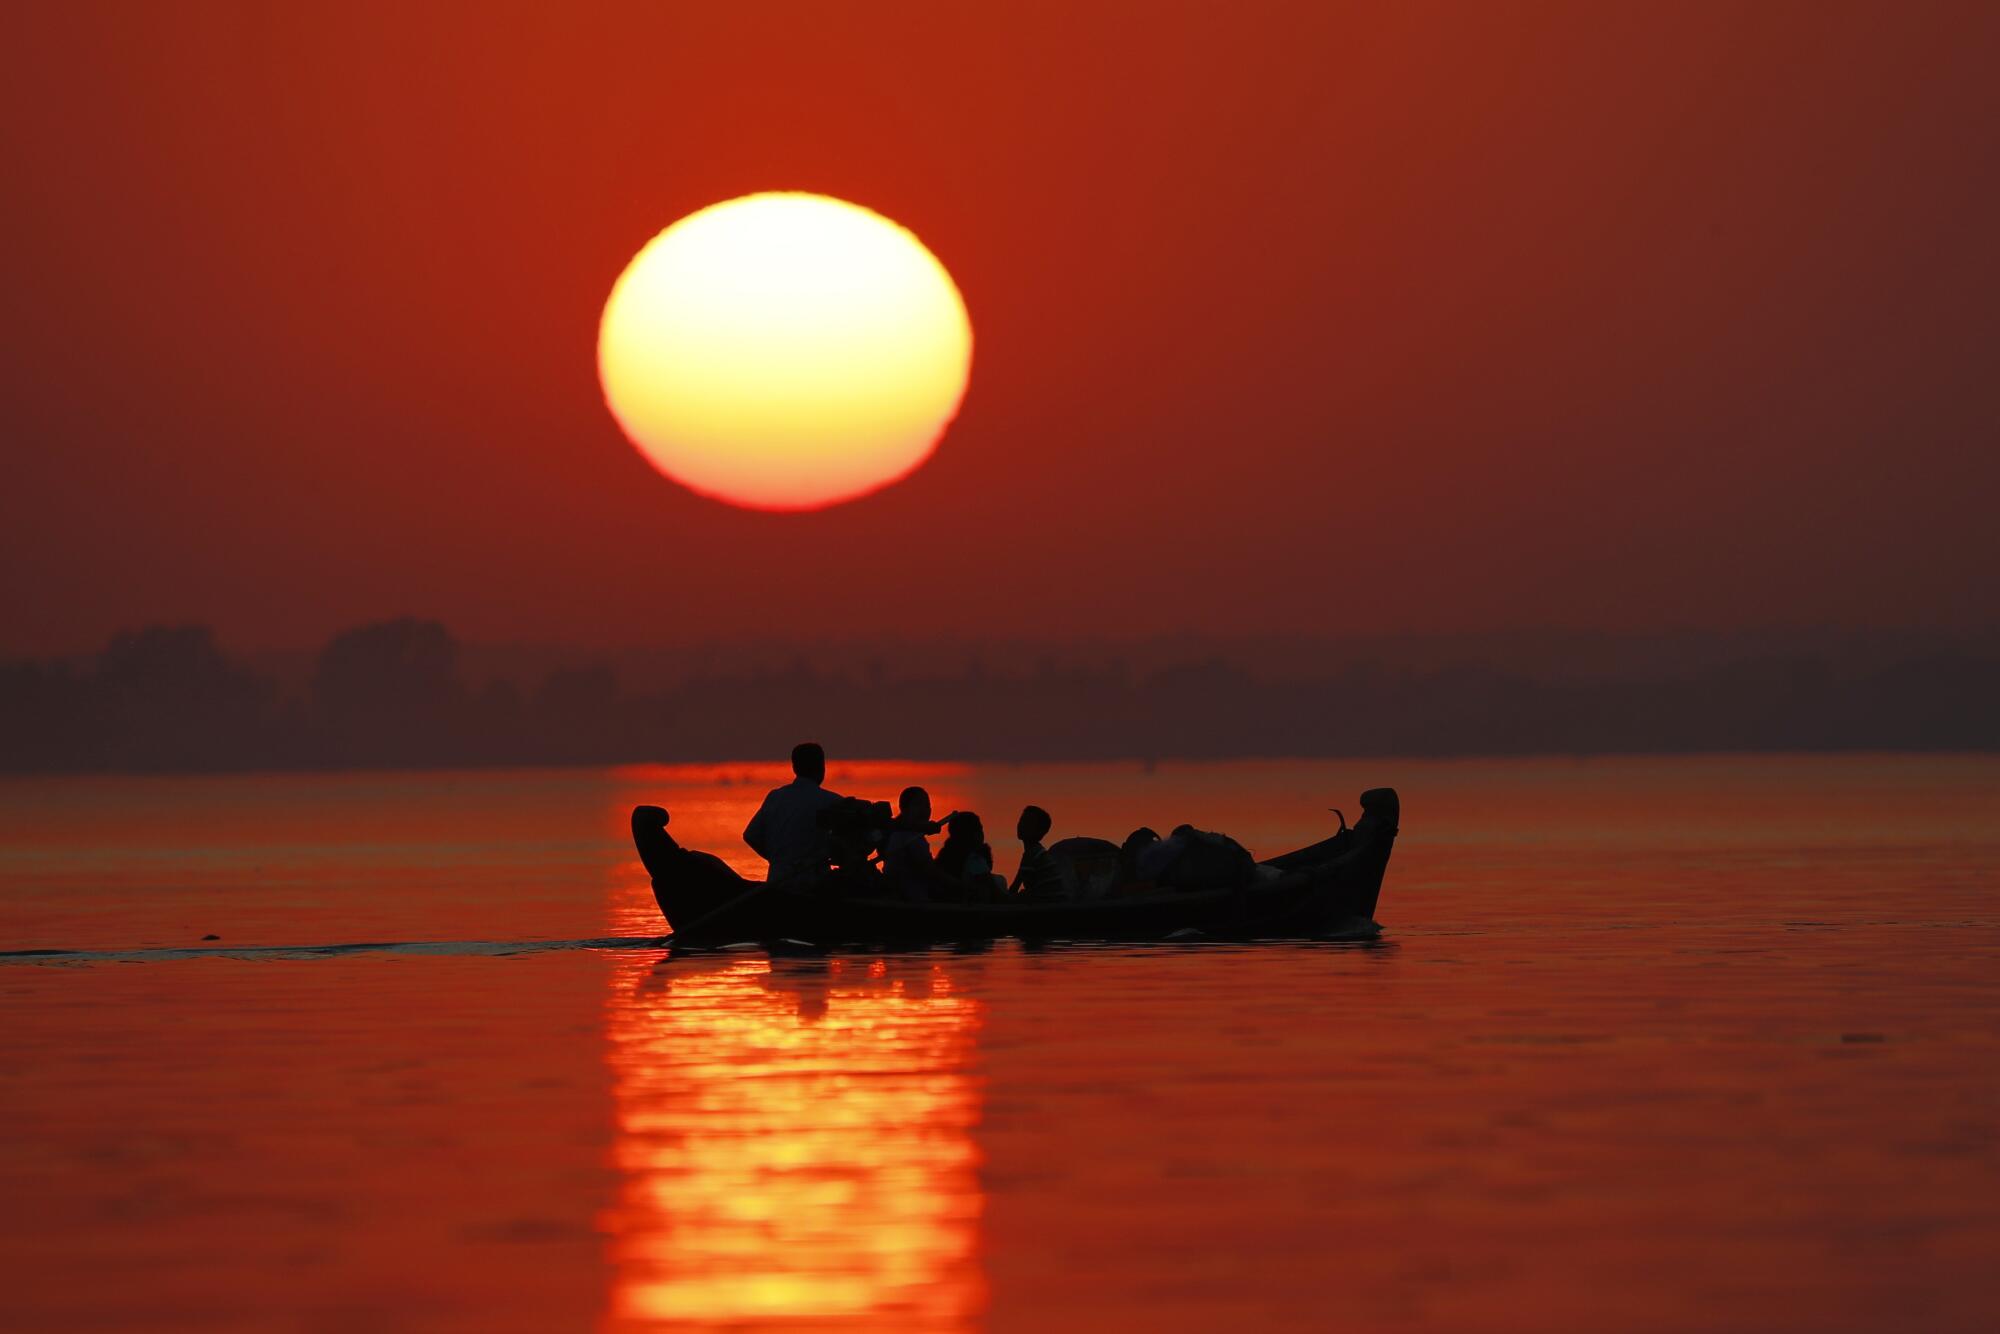 People and a small boat are in silhouette on a river, with the sun behind them, large and low on the horizon.